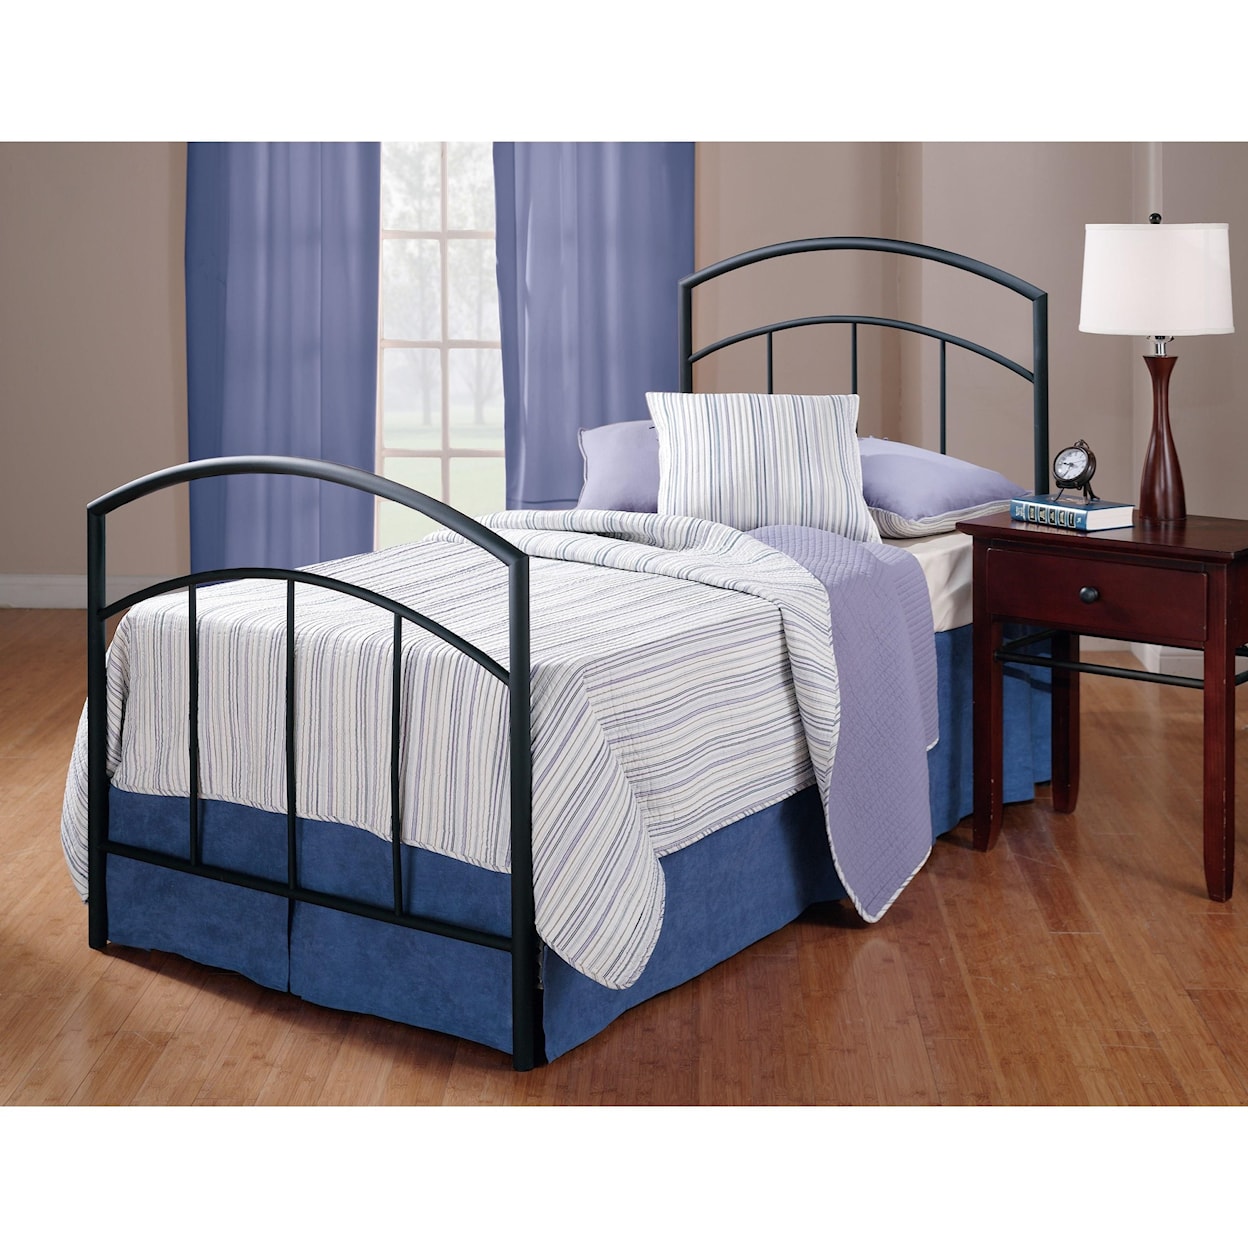 Hillsdale   Twin Bed Set with Rails